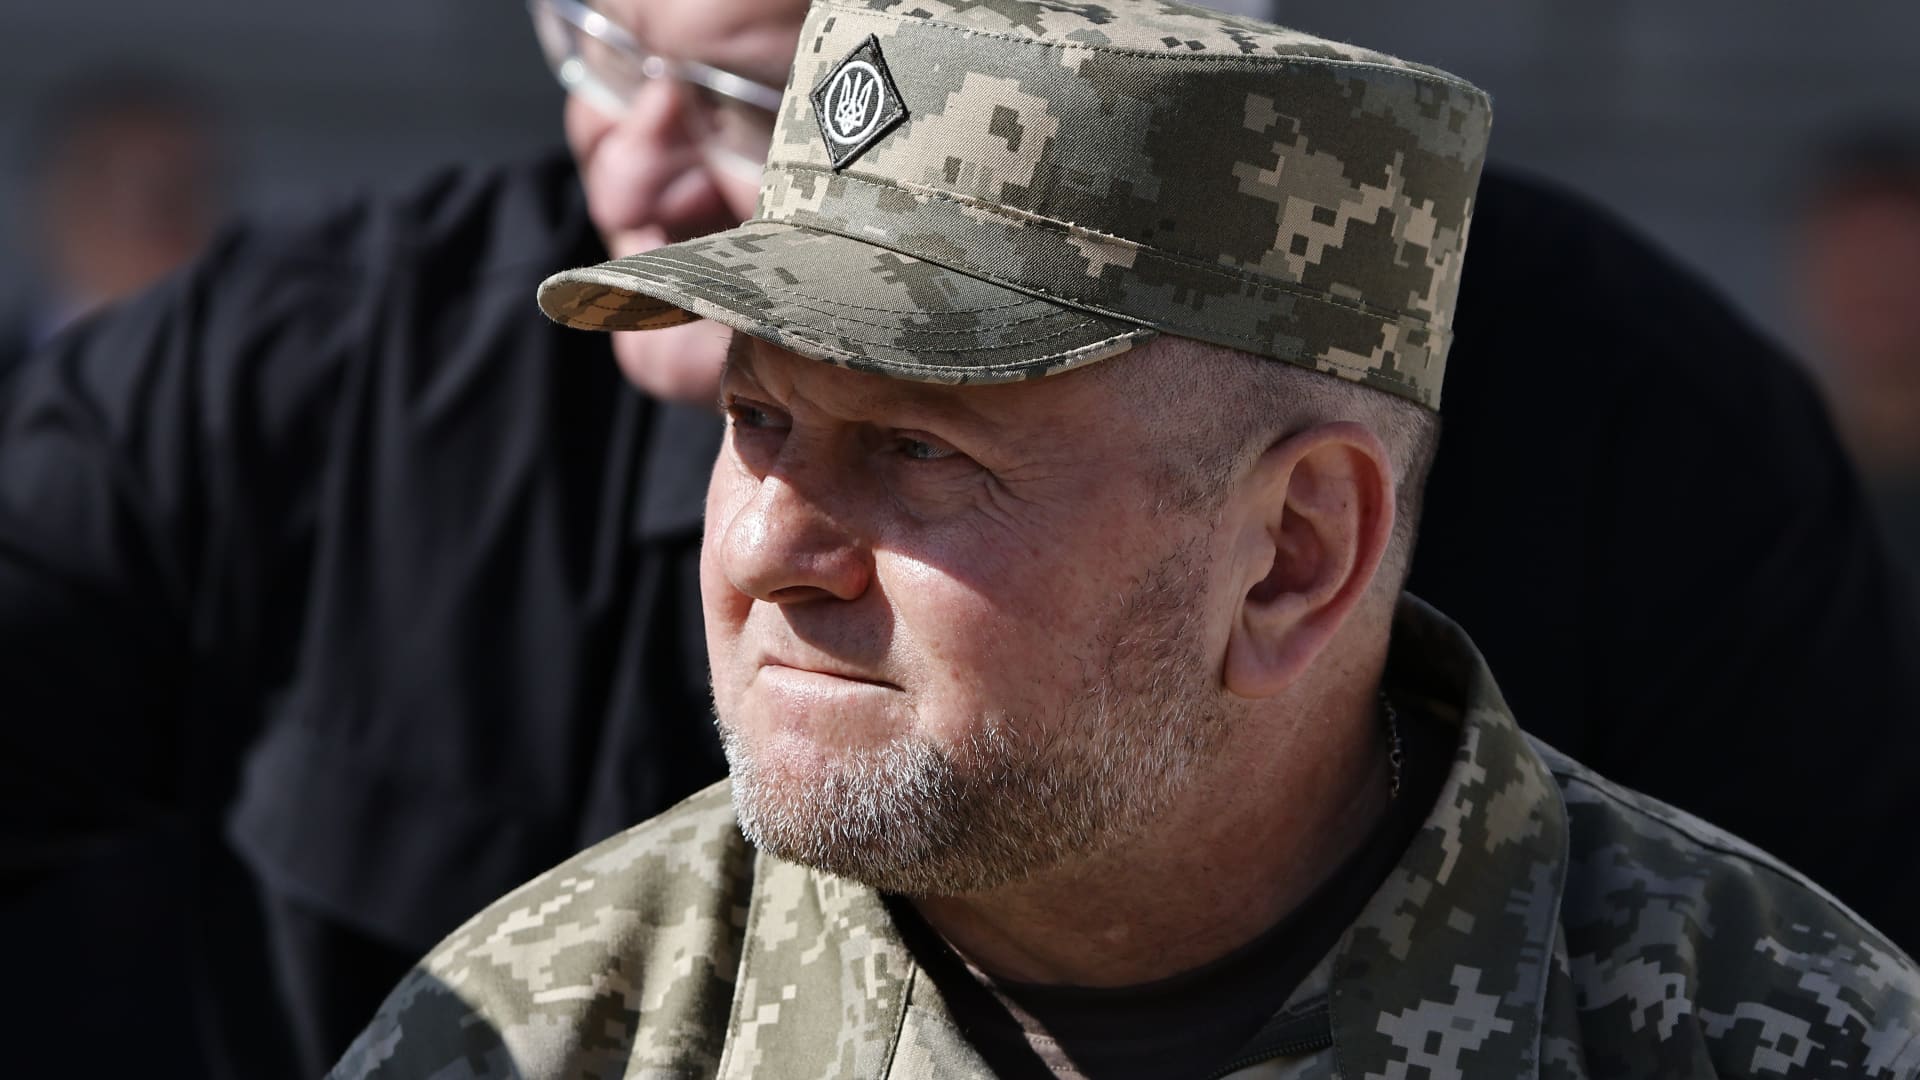 Valery Zaluzhnyi, commander-in-chief of the Armed Forces of Ukraine, at an event commemorating Ukraine's Independence Day, on Aug. 24, 2023, in Kyiv, Ukraine.